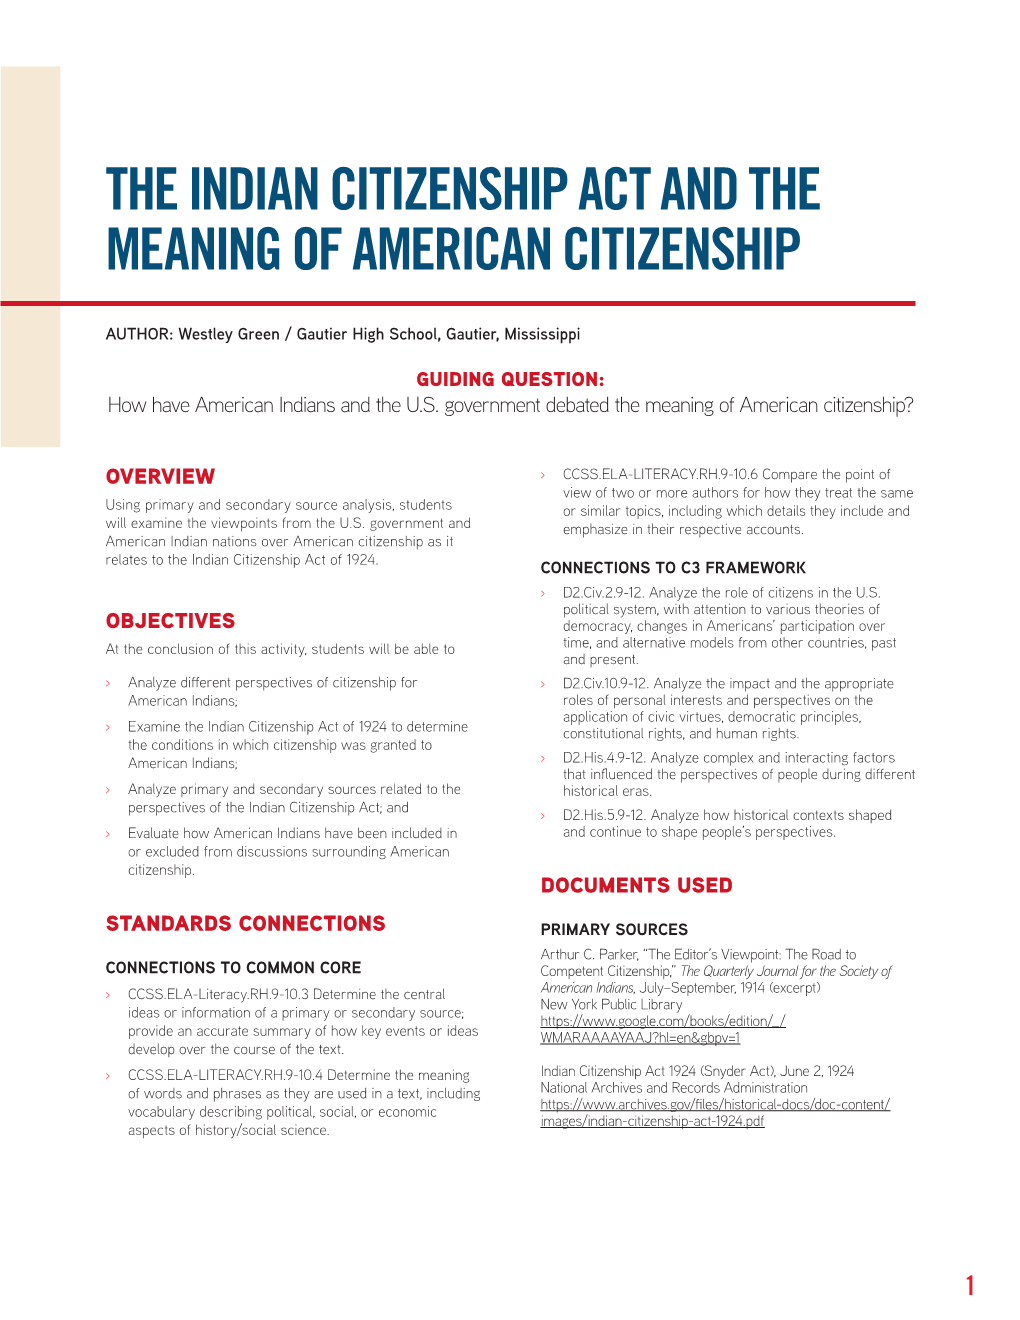 The Indian Citizenship Act and the Meaning of American Citizenship